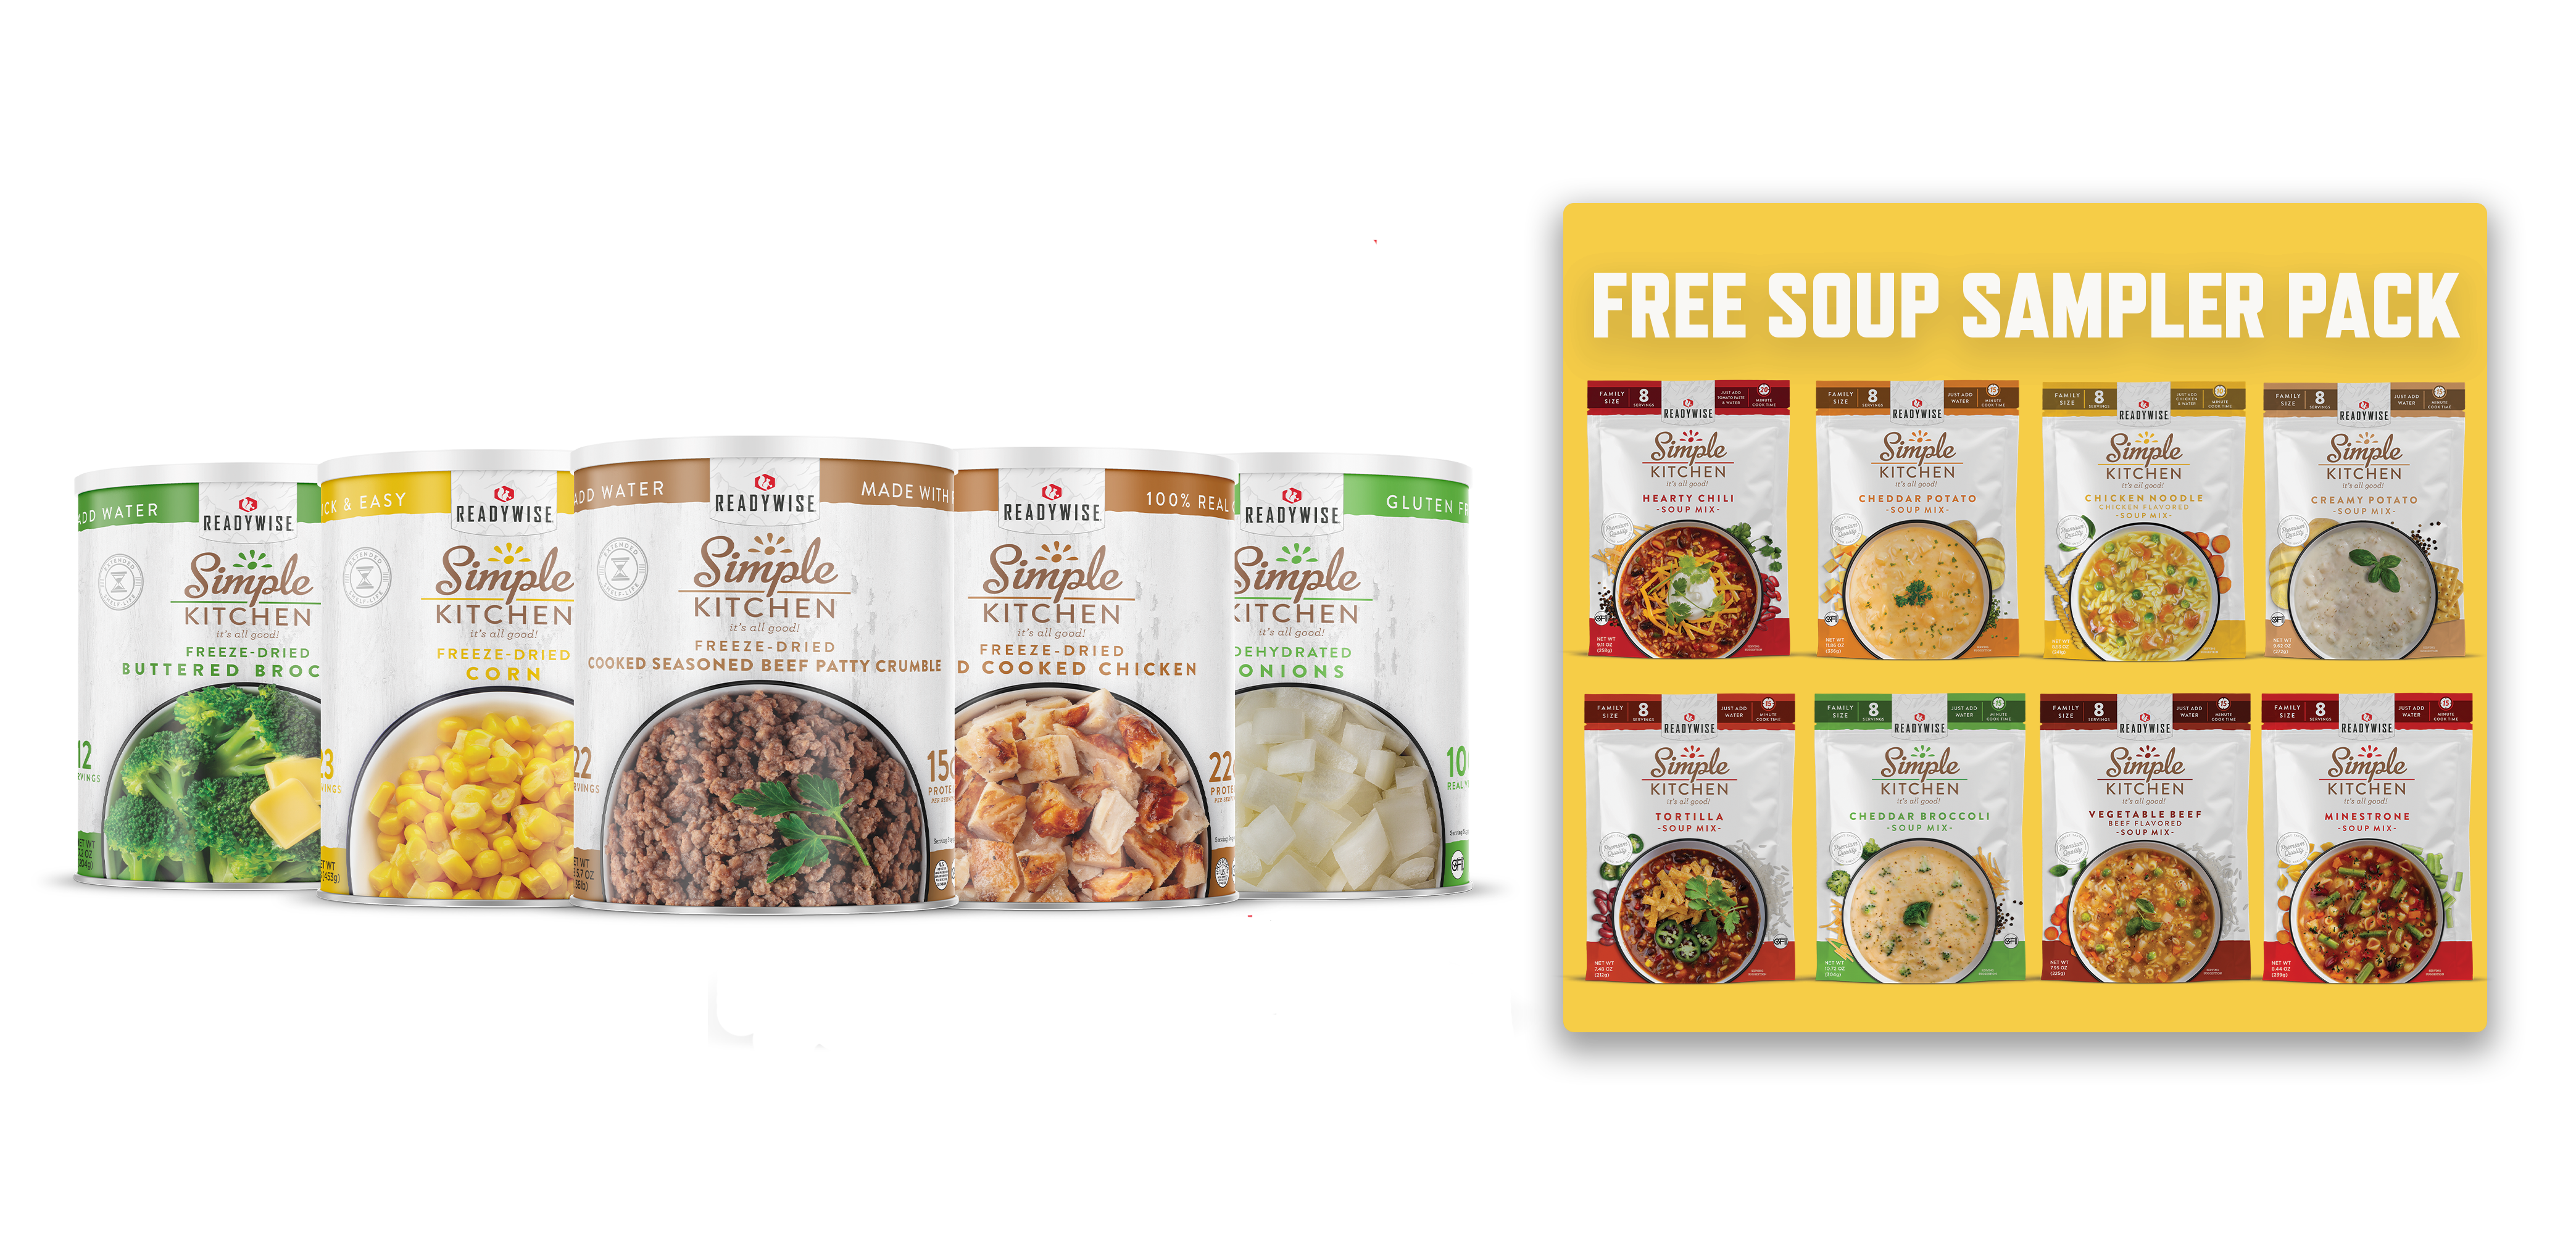 #10 Can Bundle with FREE Soup Variety Pack